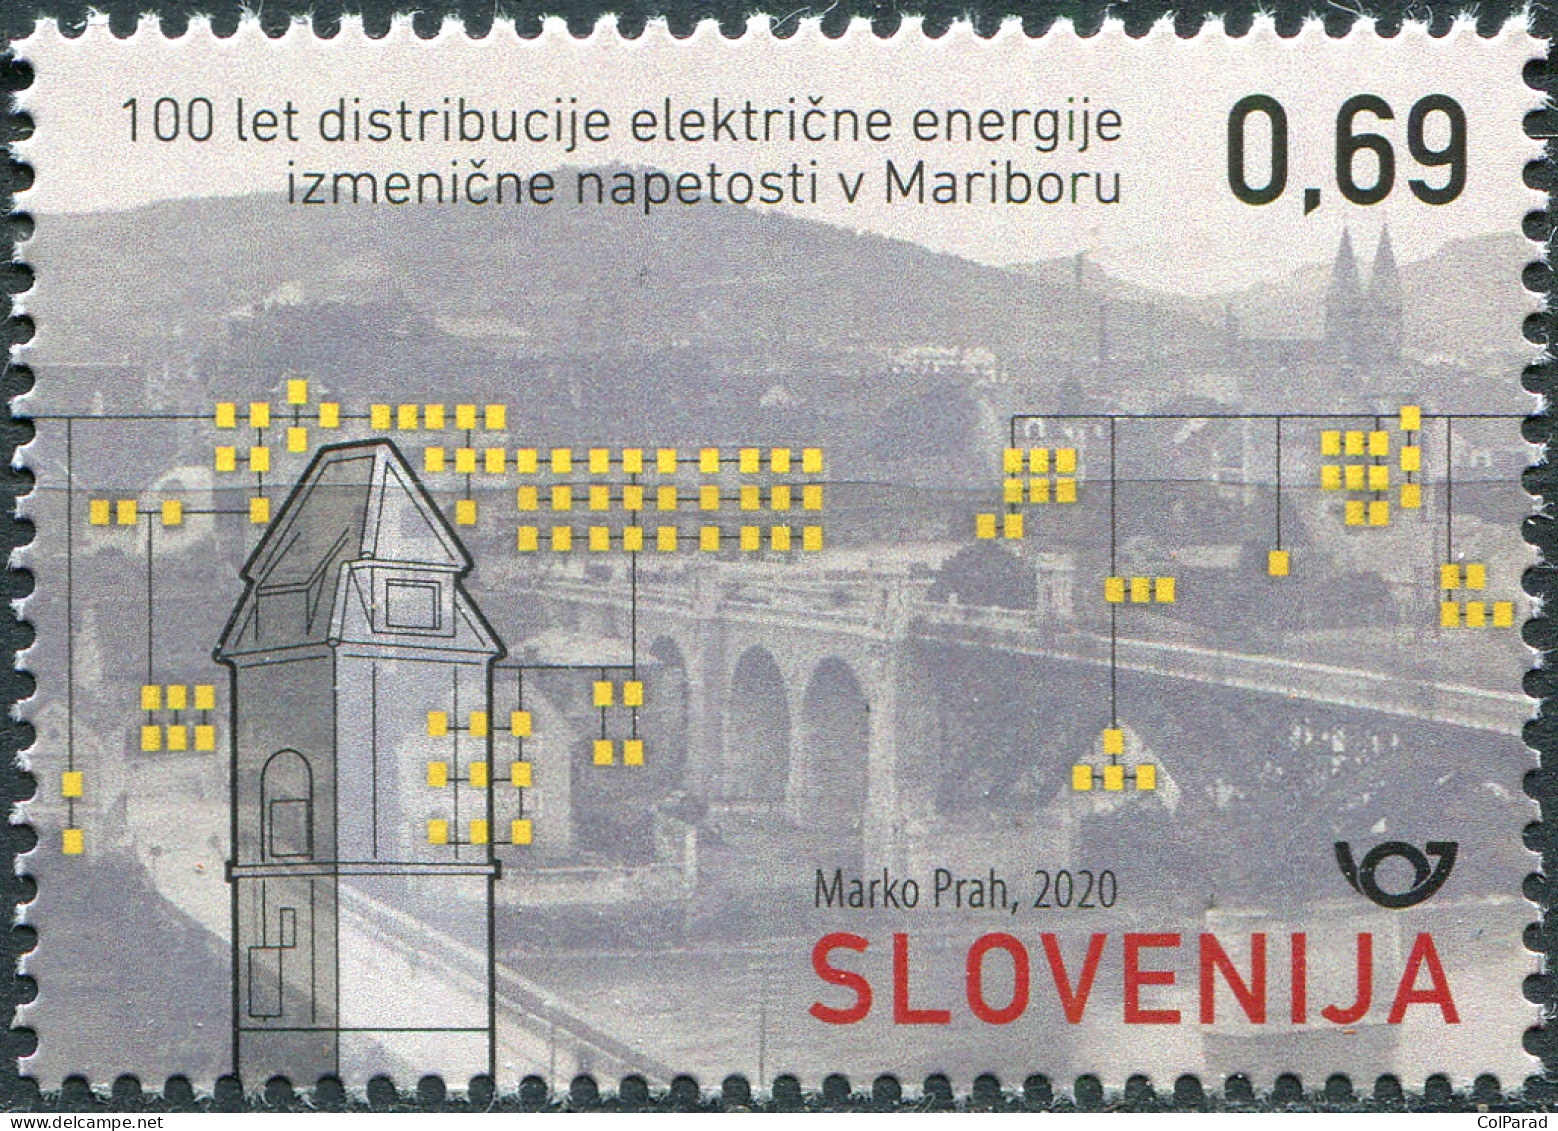 SLOVENIA - 2020 - STAMP MNH ** - Centenary Of The Electricity Supply In Maribor - Slovenia